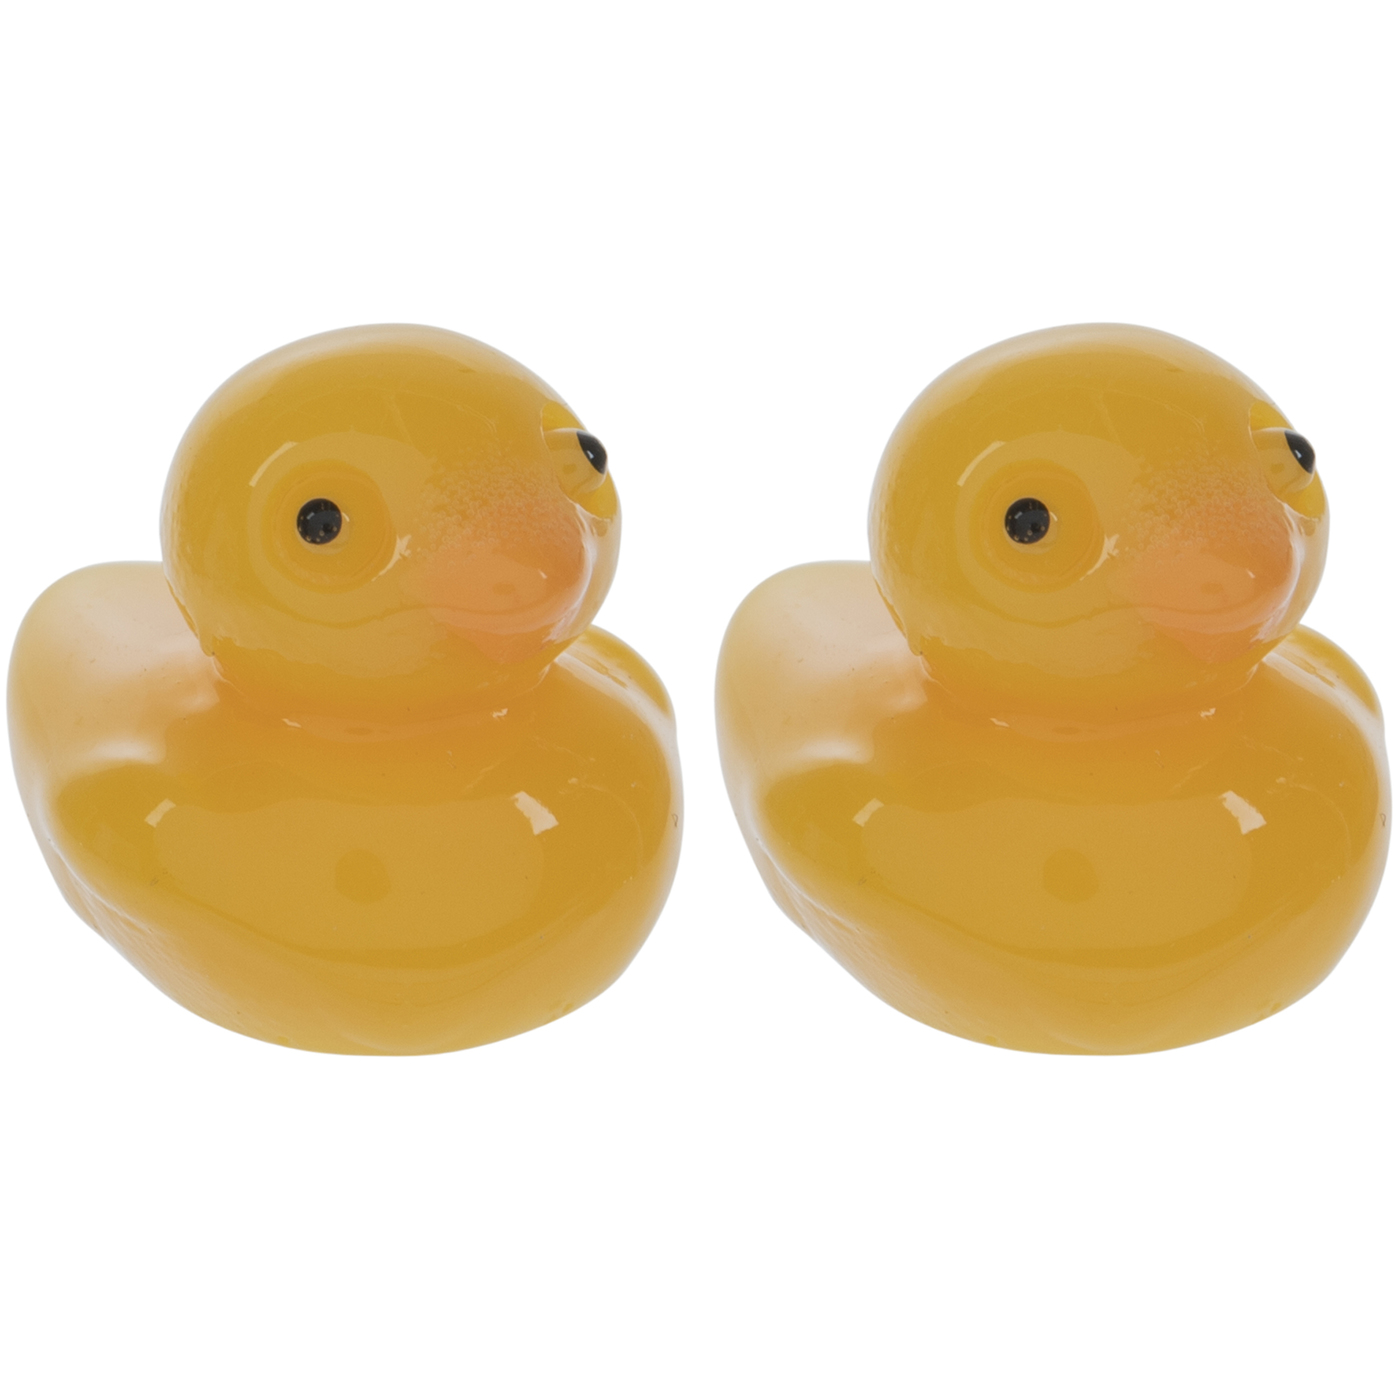 Download Rubber Duckies Images Nomer 26